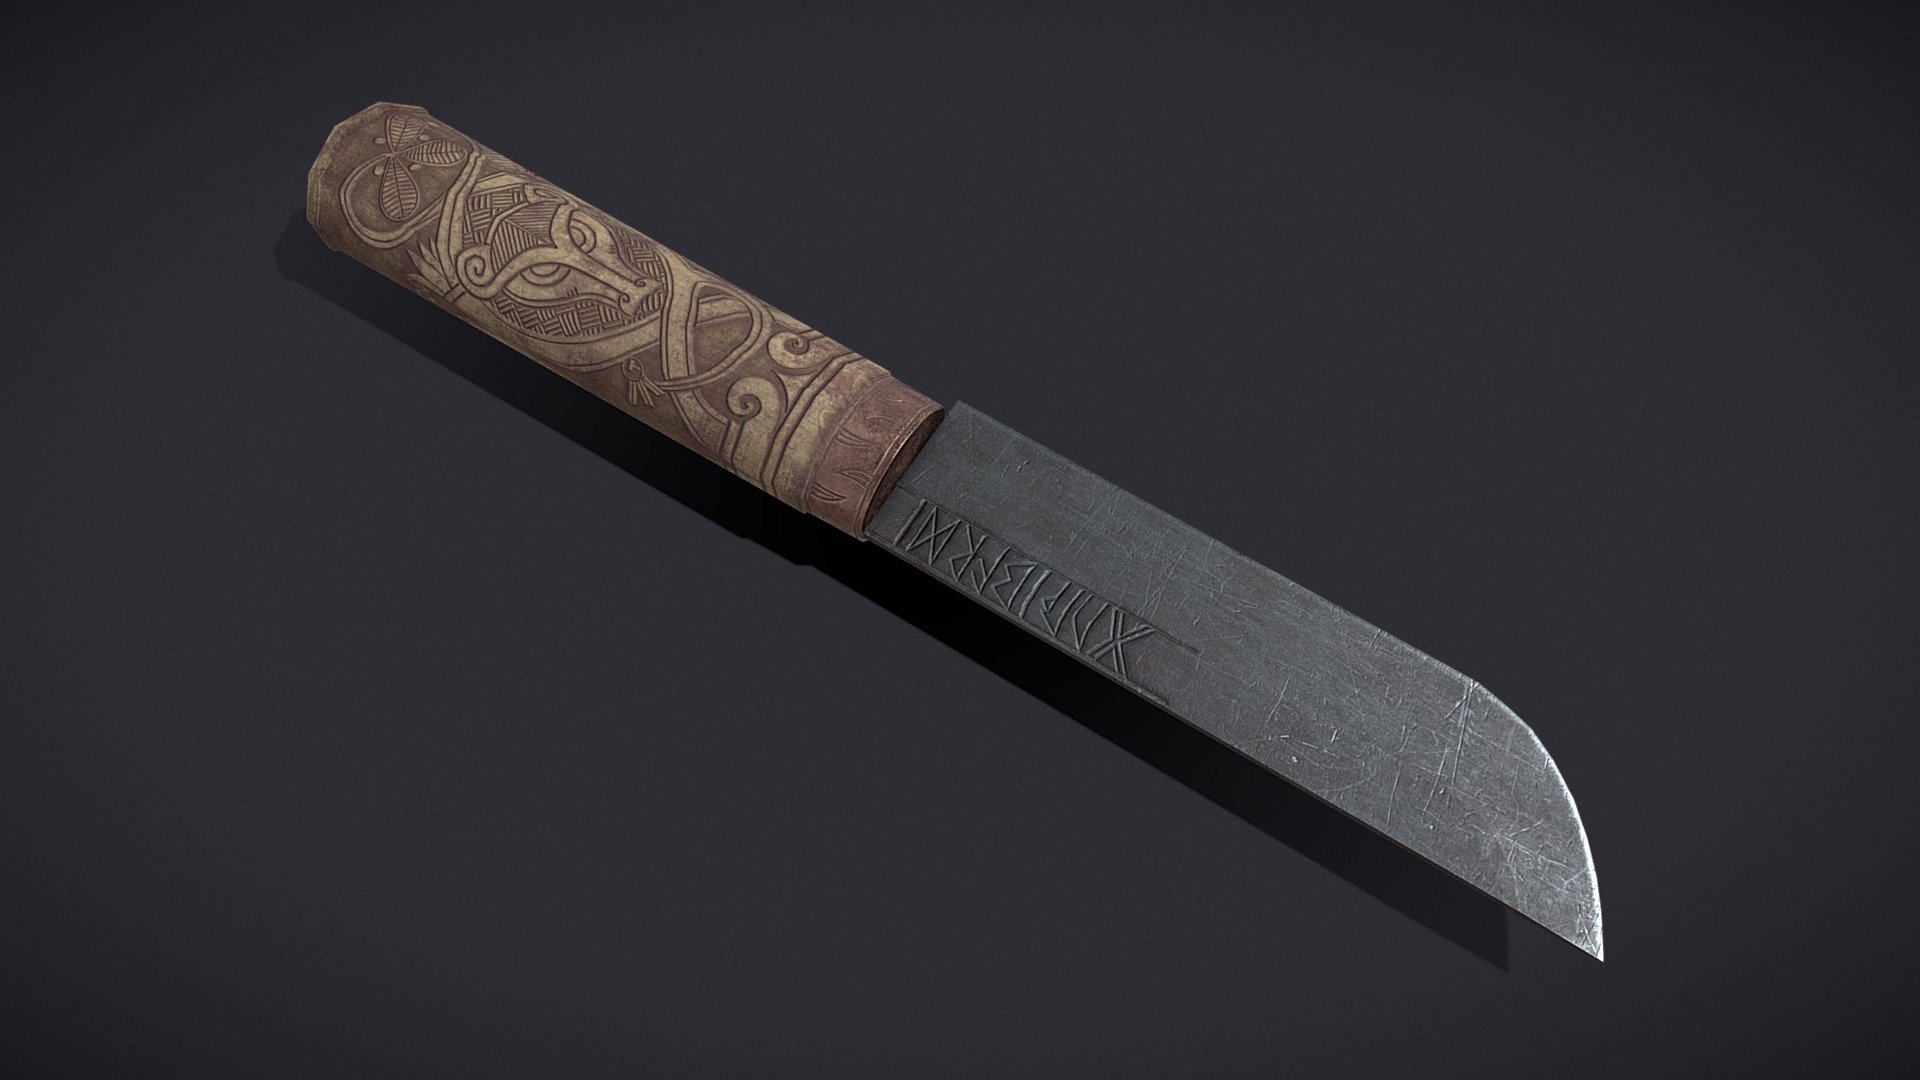 Customer Service Guaranteed. From the Creators at Get Dead Entertainment. Please like and Rate! Follow us on FaceBook and Instagram to keep updated on all our newest models. https://www.facebook.com/GetDeadEntertainment/ - Viking_Style_Knife - Buy Royalty Free 3D model by GetDeadEntertainment 3d model